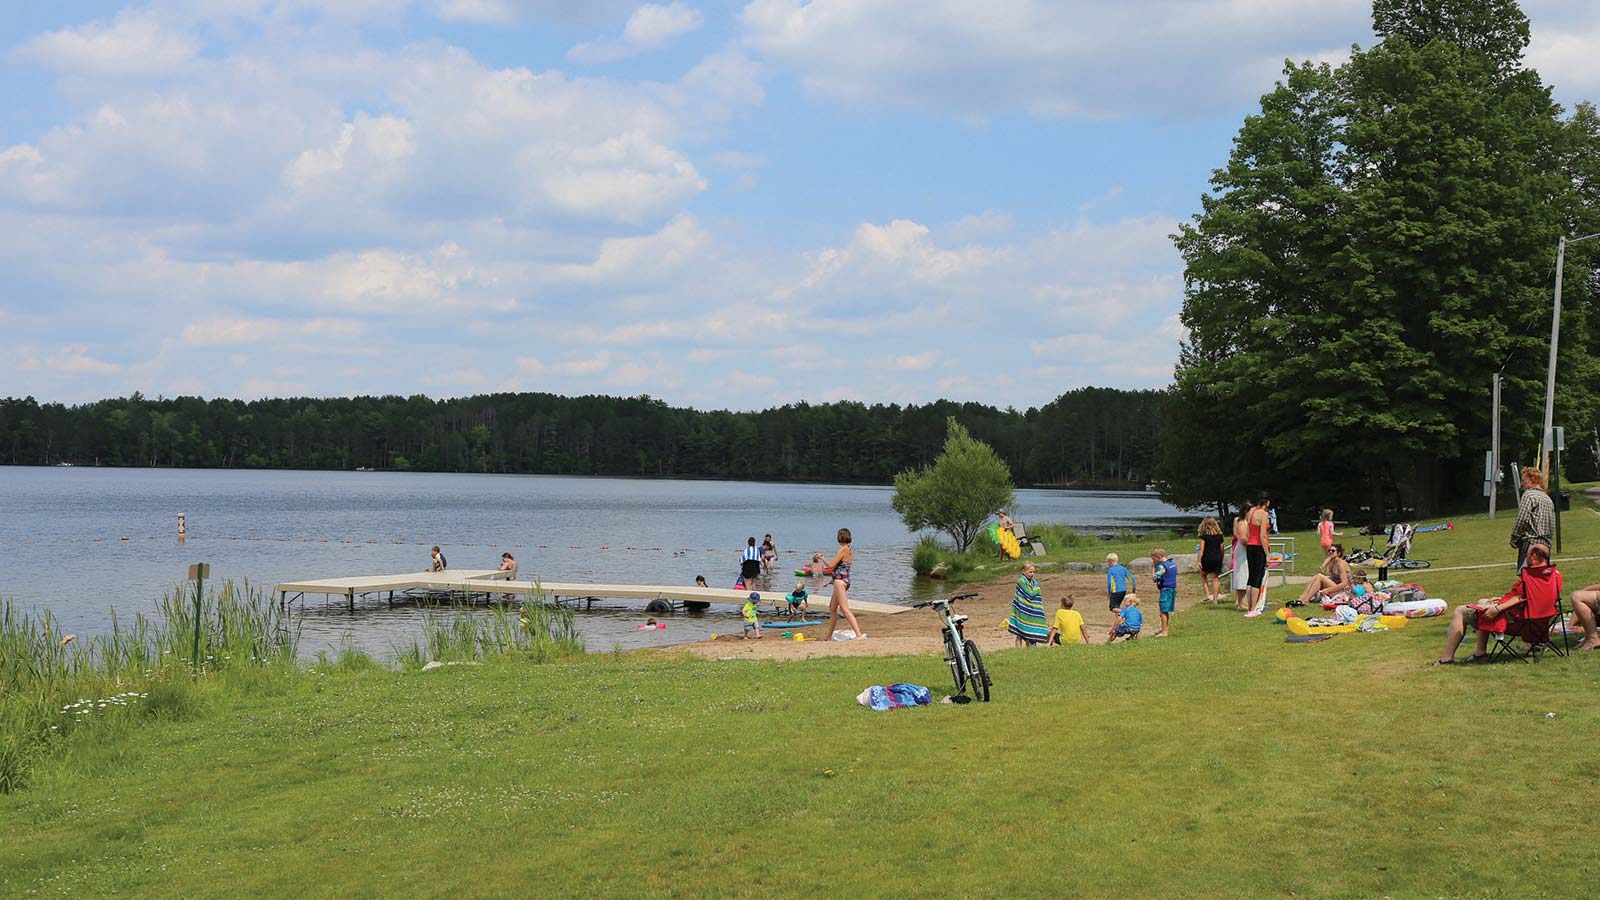 Cool down on the water this summer | People enjoying the beach with a dock on a summer day